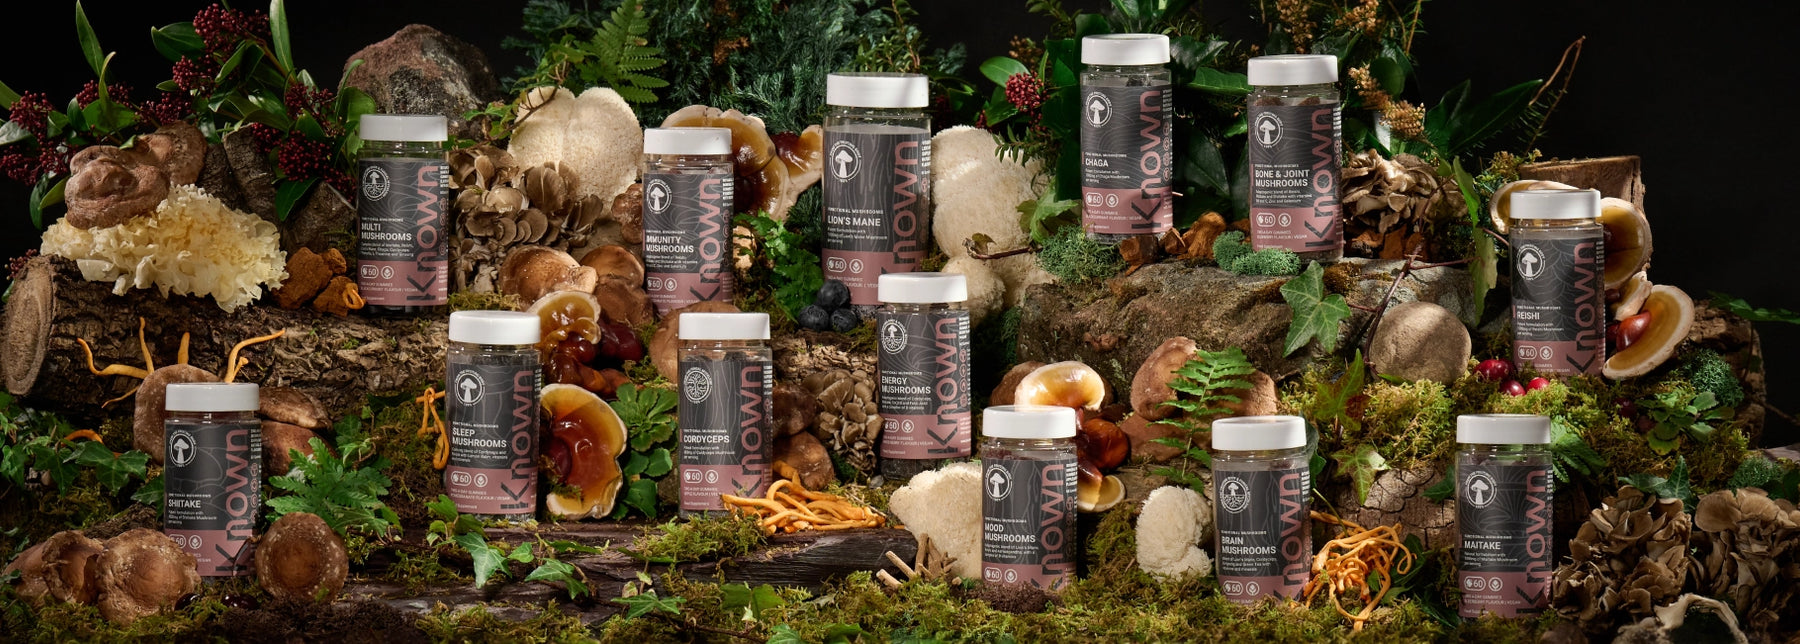 Meet The New Mushroom Range by Known Nutrition